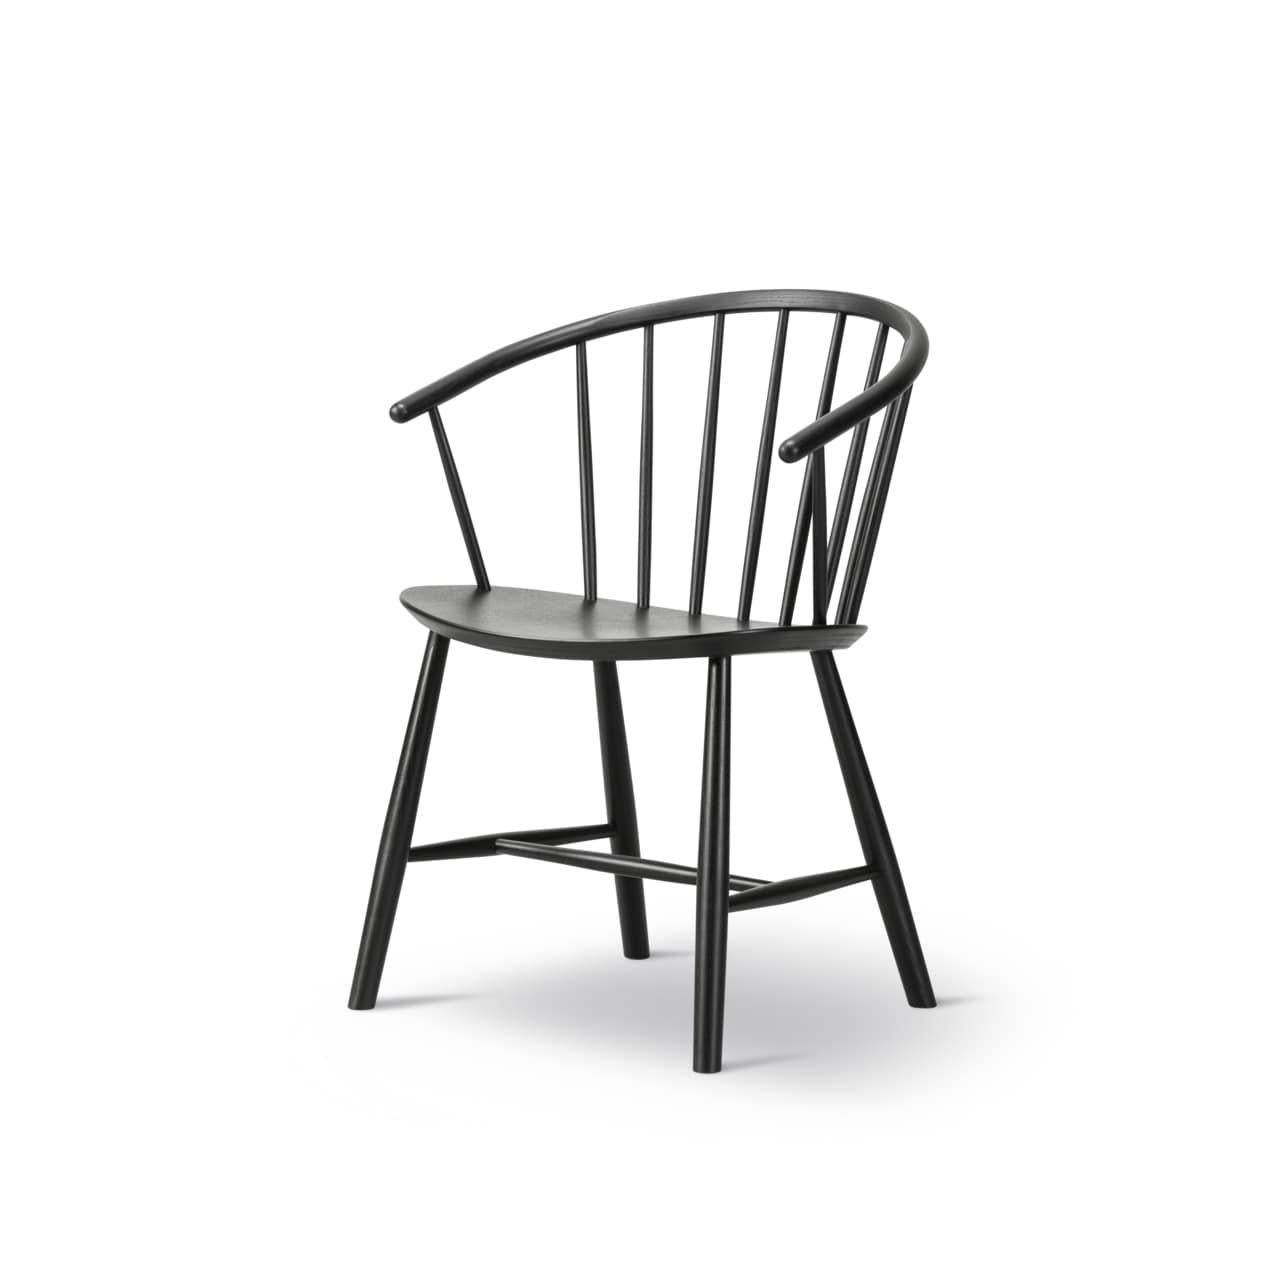 Johansson J64 Chair - Black Ash - by Ejvind A. Johansson for Fredericia In New Condition For Sale In Dubai, AE